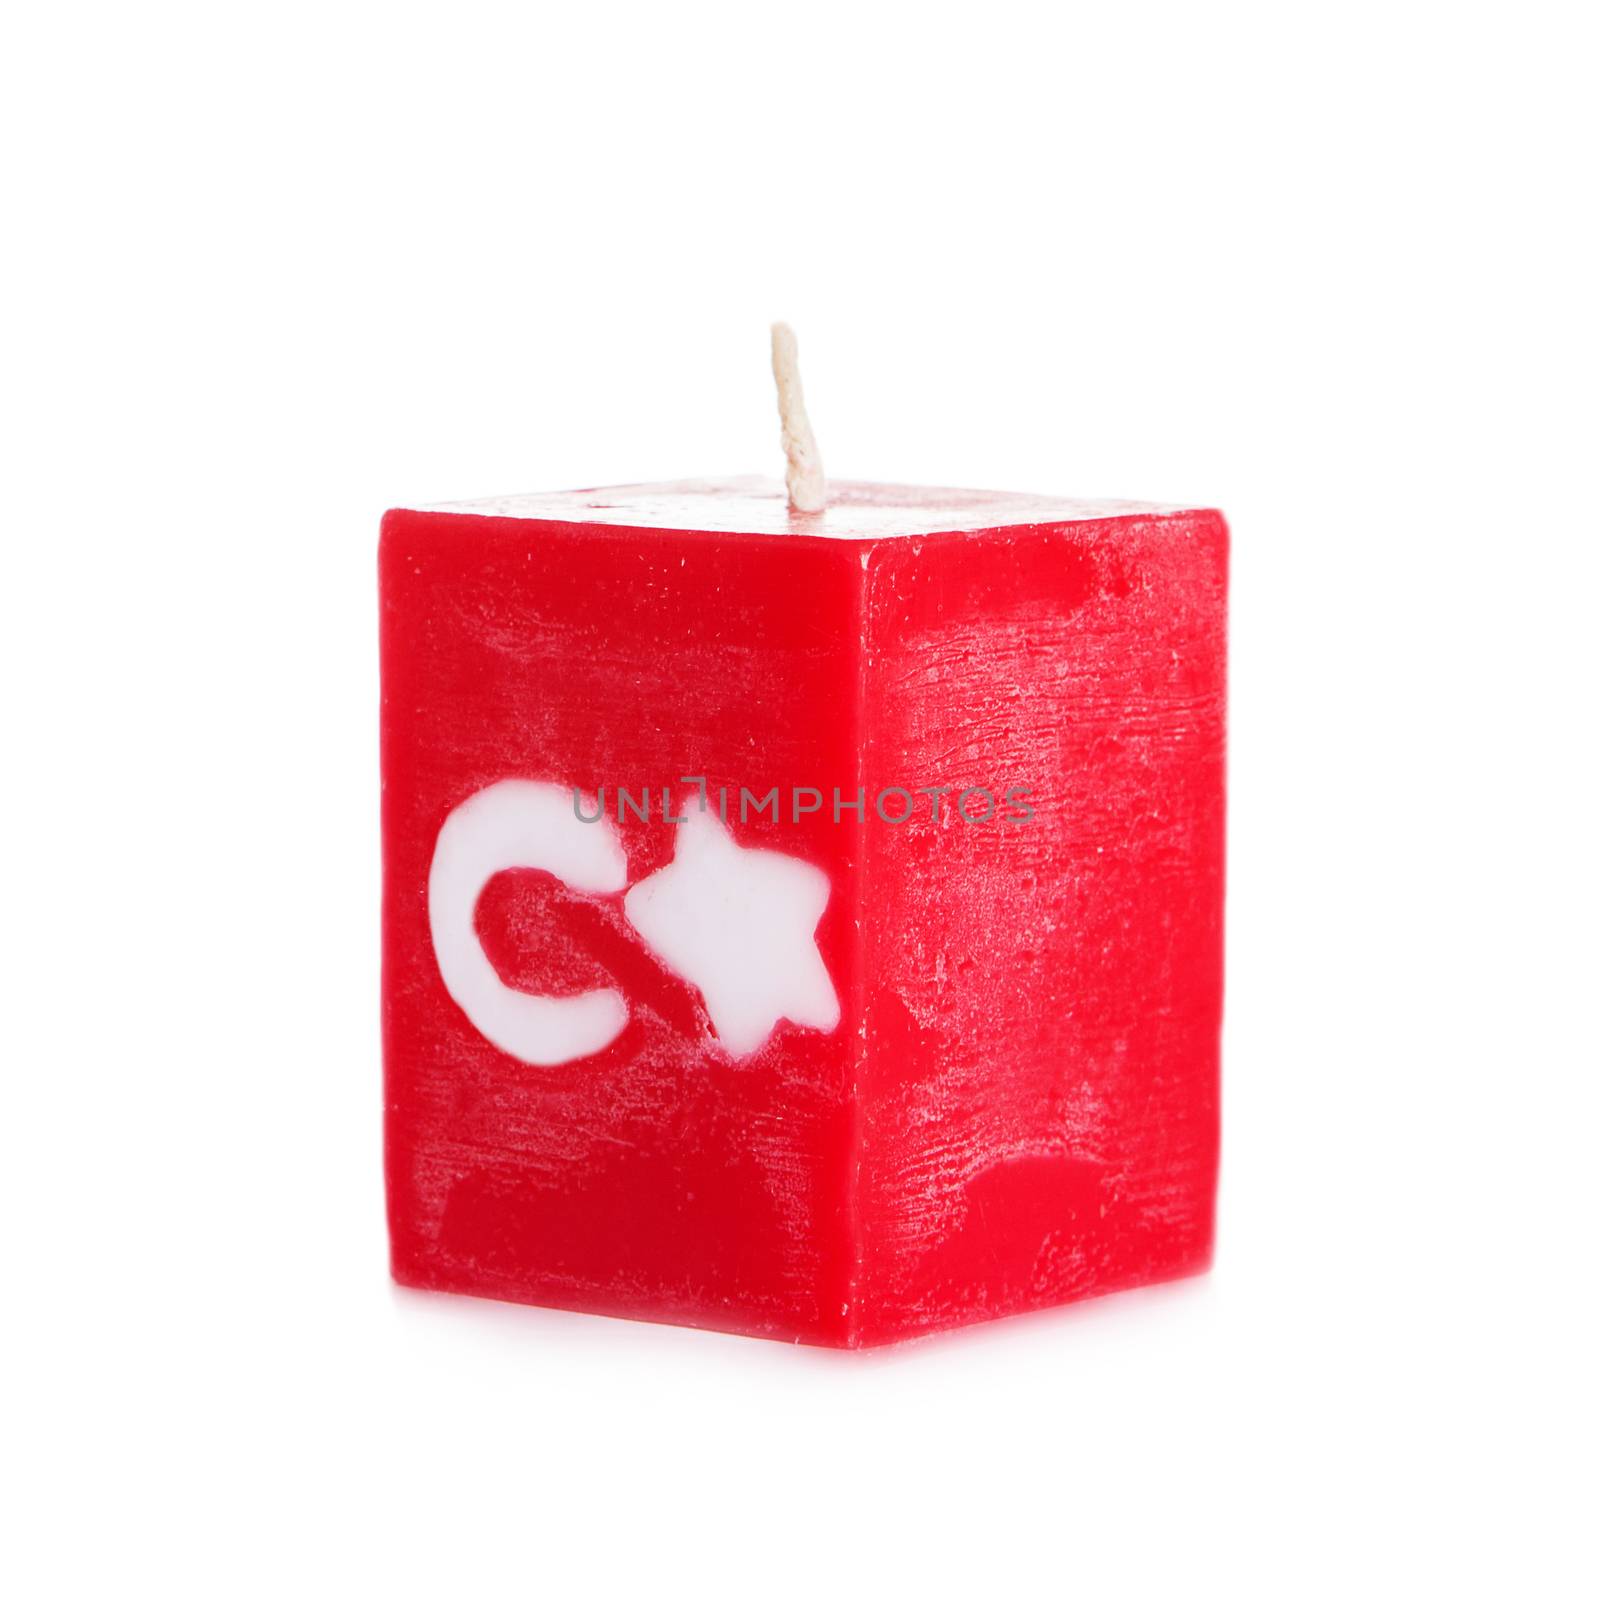 Decorative Handmade candle isolated on white background. Cube-shaped souvenir candle as Turkish state flag and country symbol. Rectangular cube block shaped candles.